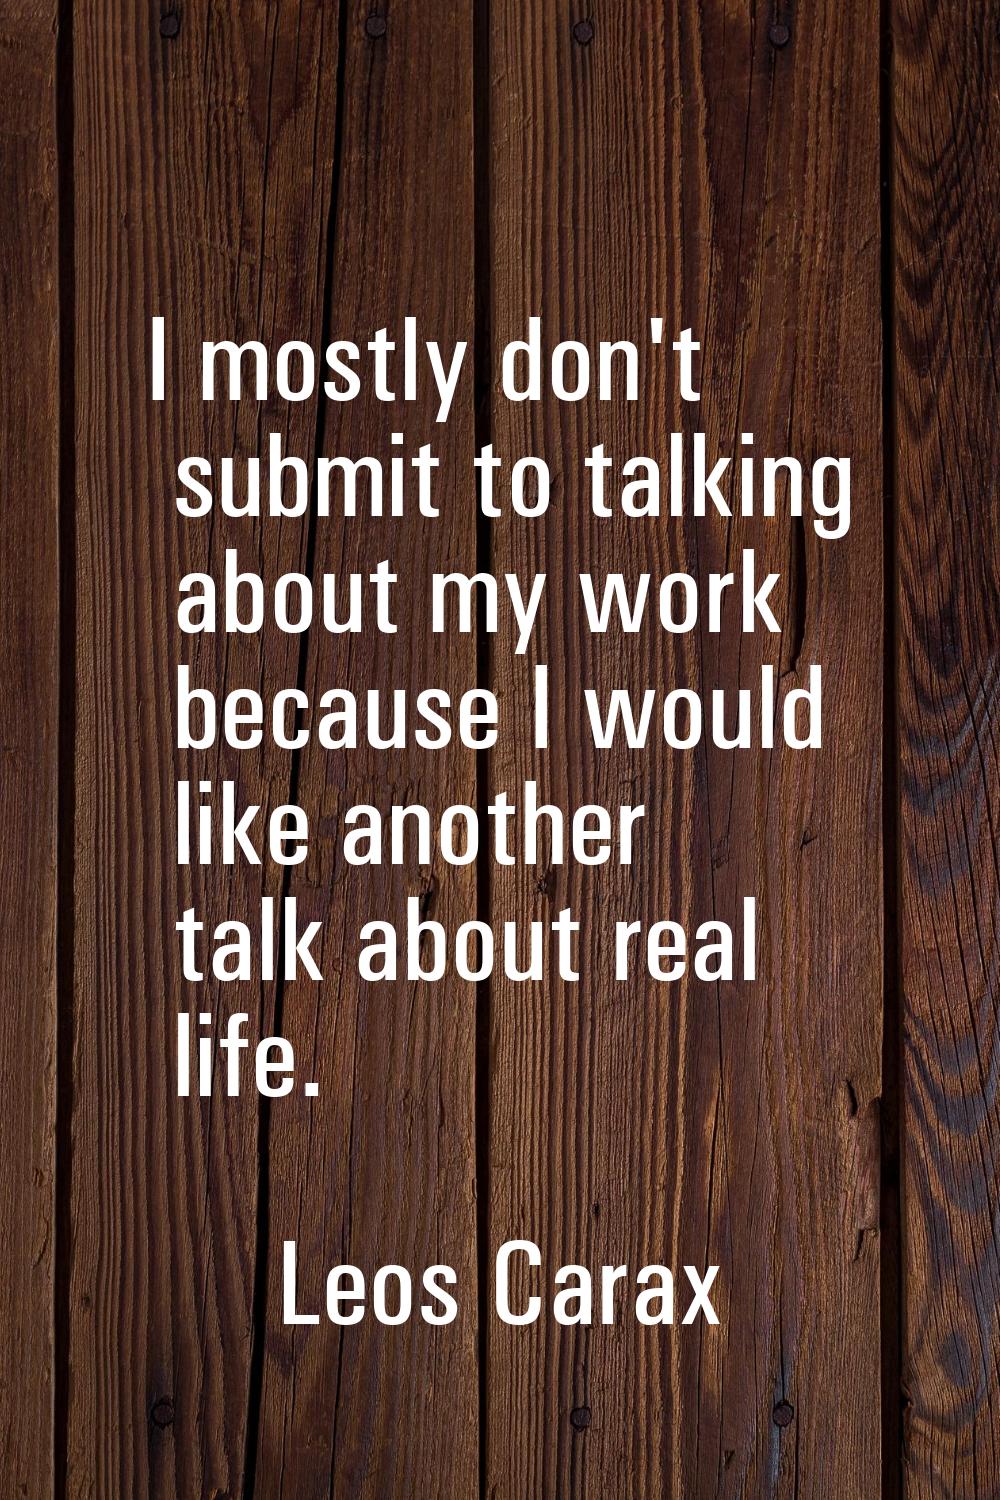 I mostly don't submit to talking about my work because I would like another talk about real life.